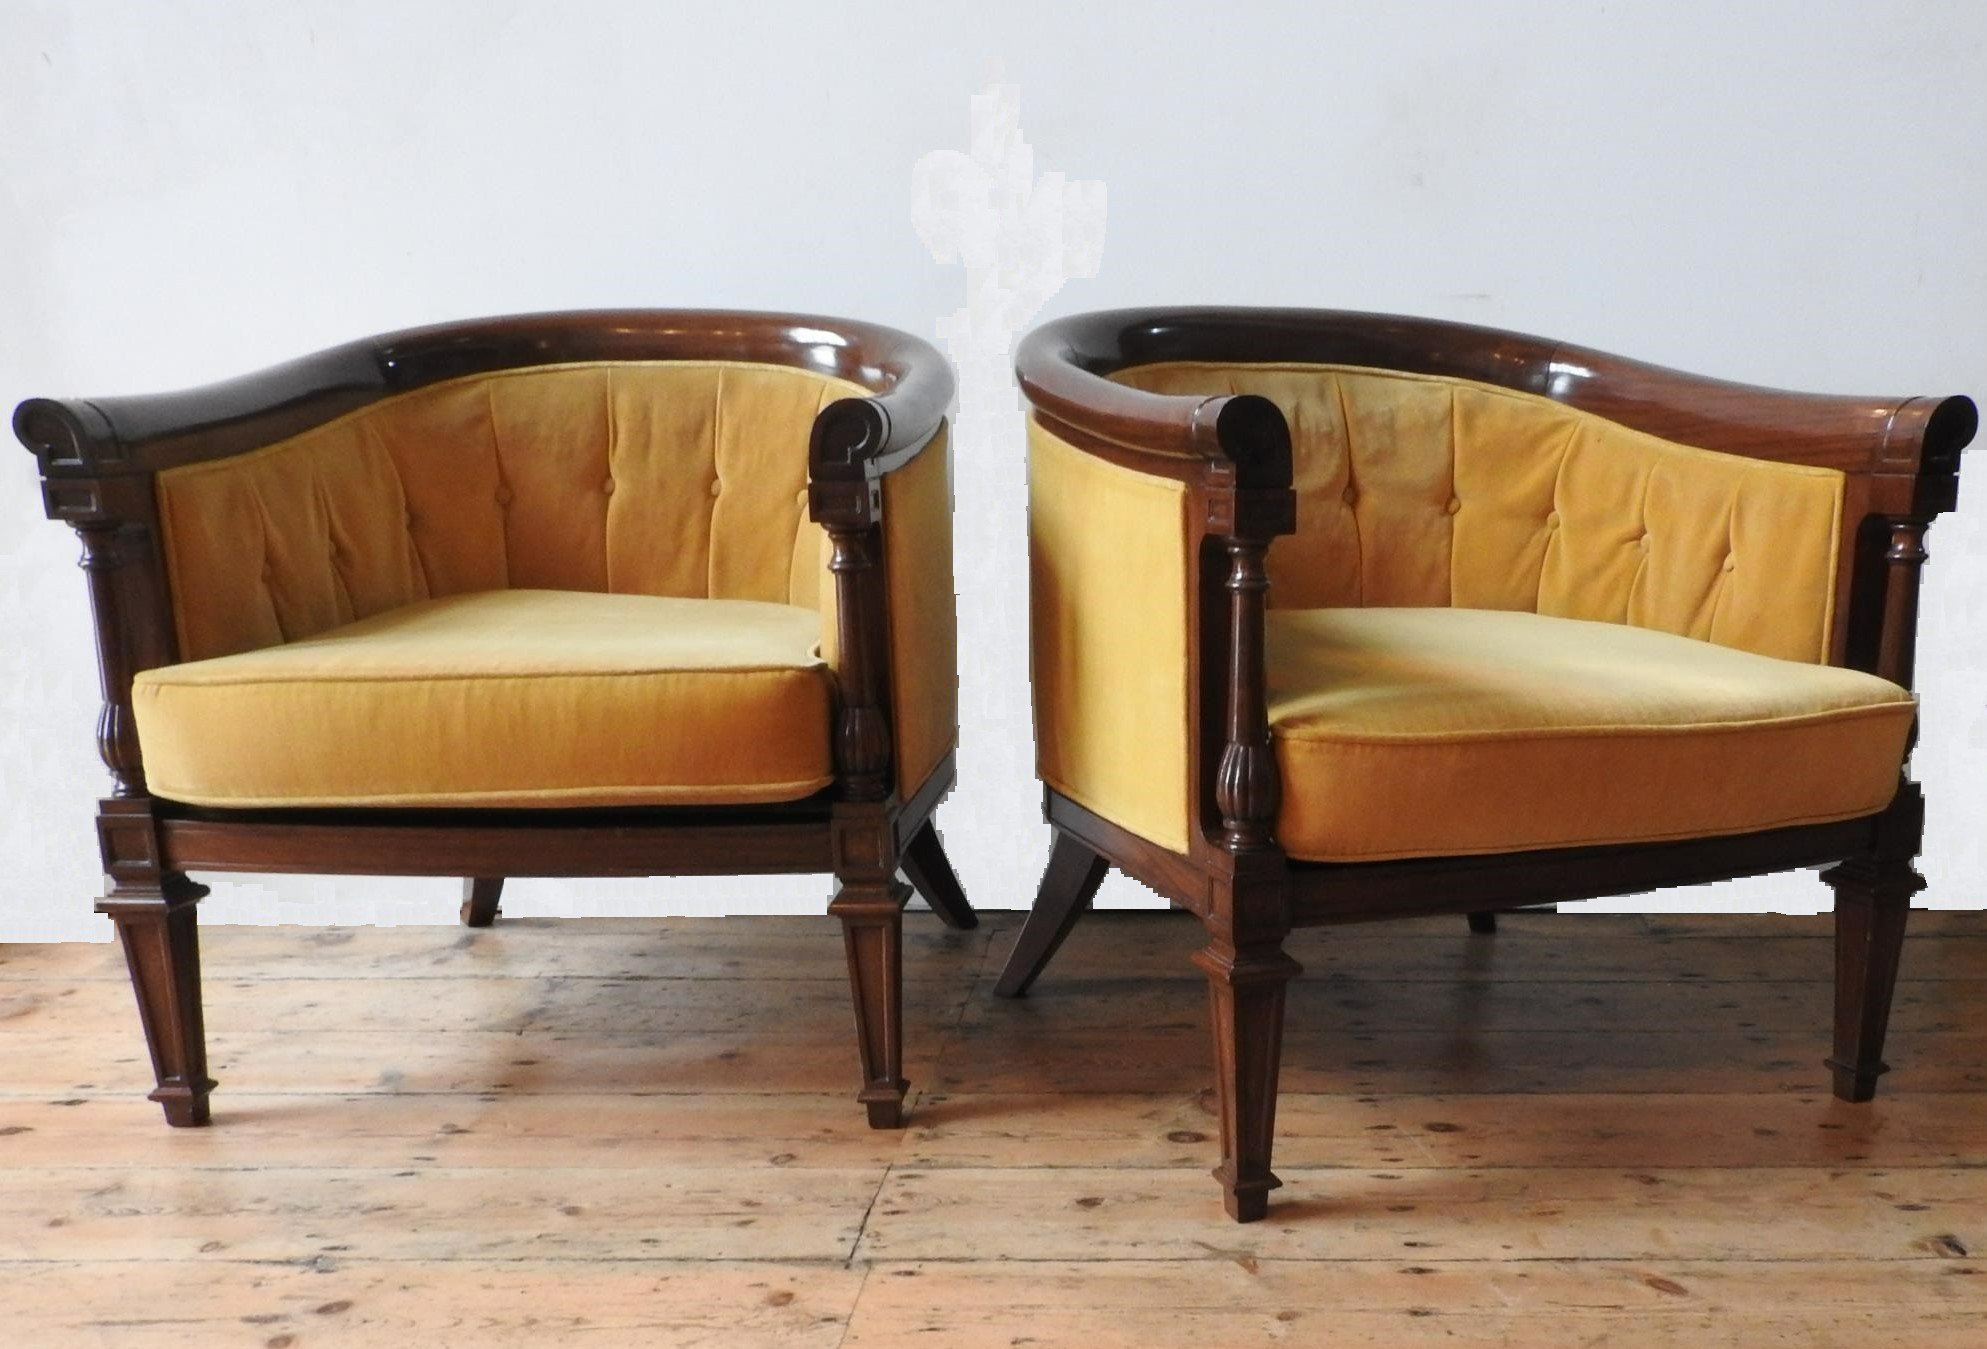 A PAIR OF ANGLO-CHINESE ROSEWOOD BERGERES, with gold coloured button back upholstery and removable